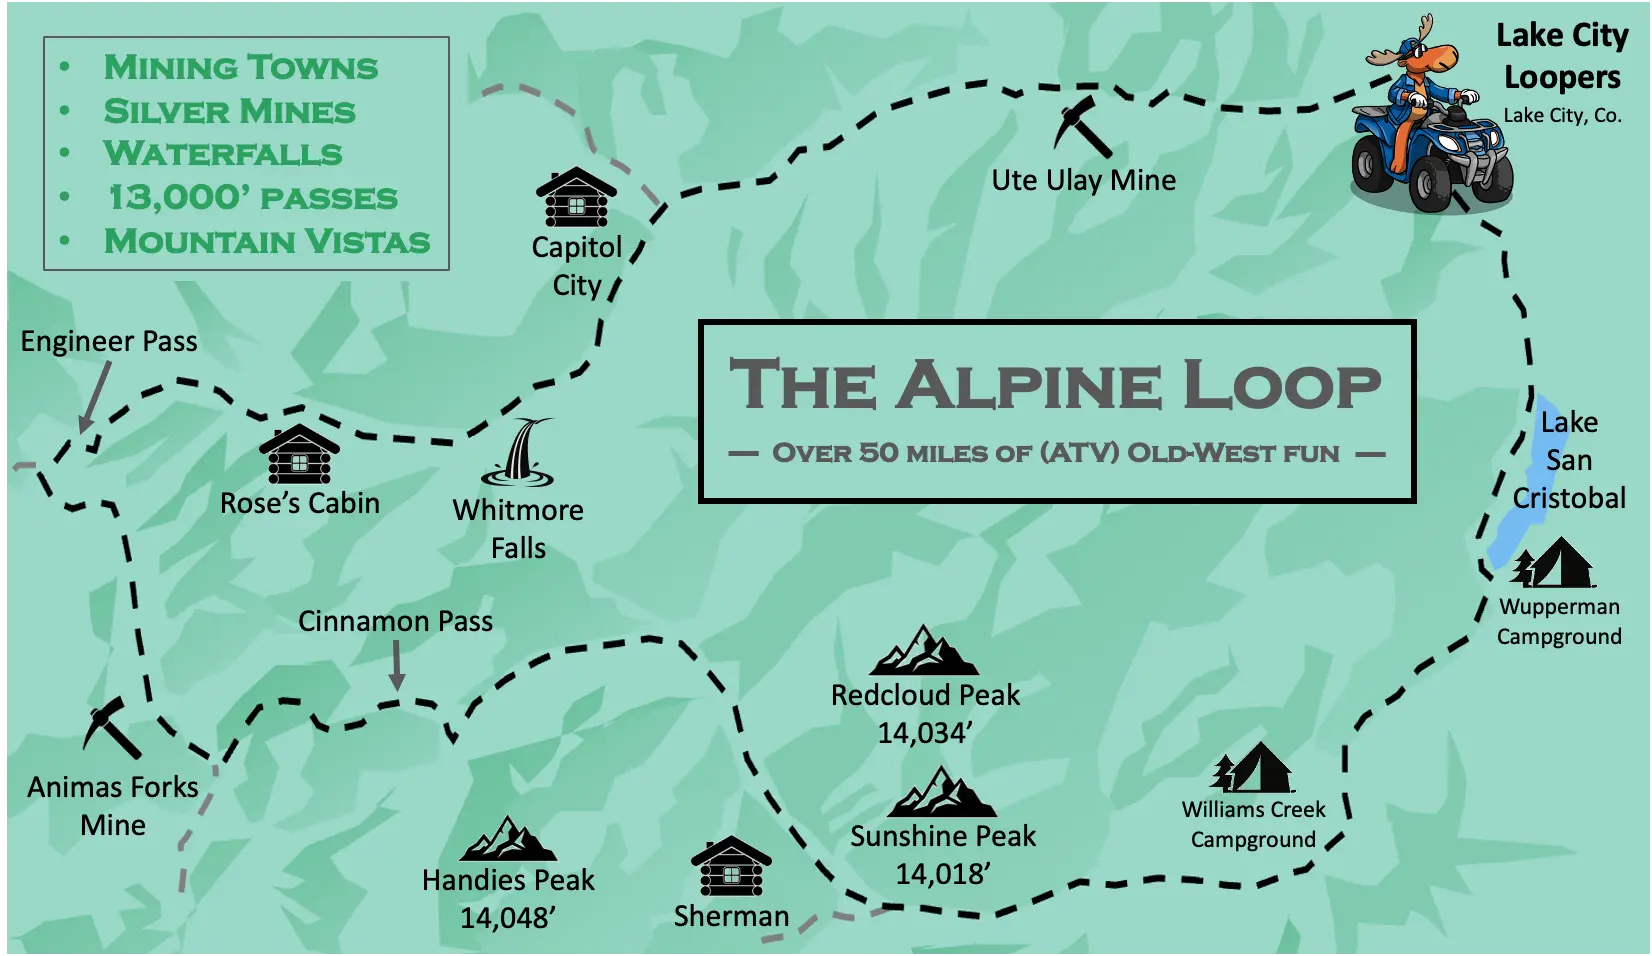 The Alpine Loop is a great thing to do in Lake City, Co